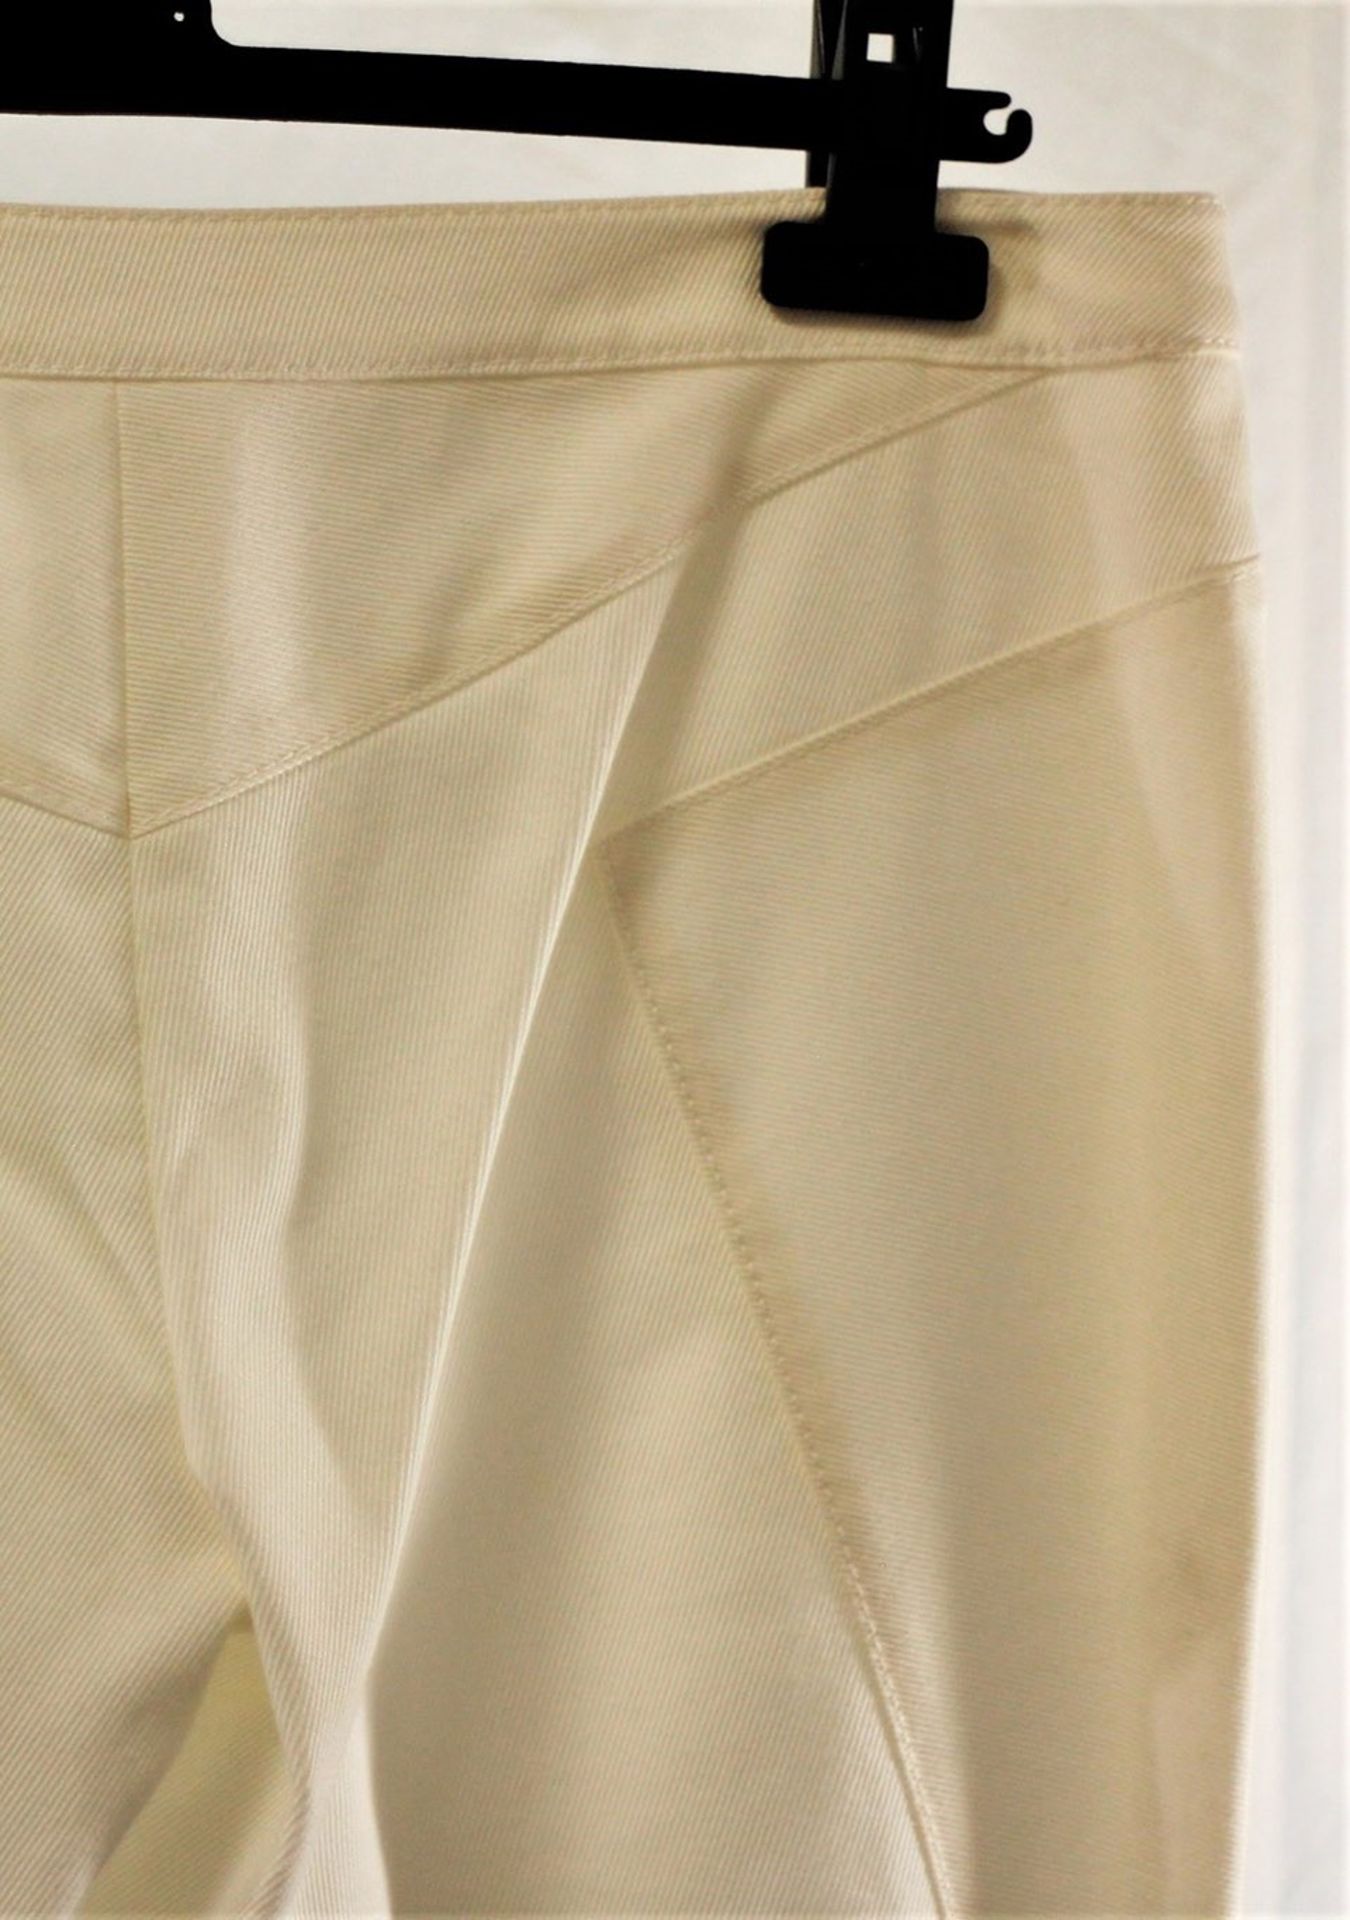 1 x Valentino Cream Trousers - Size: 10 - Material: 98% Cotton, 2% Elastane. Lining 100% Polyester - - Image 4 of 5